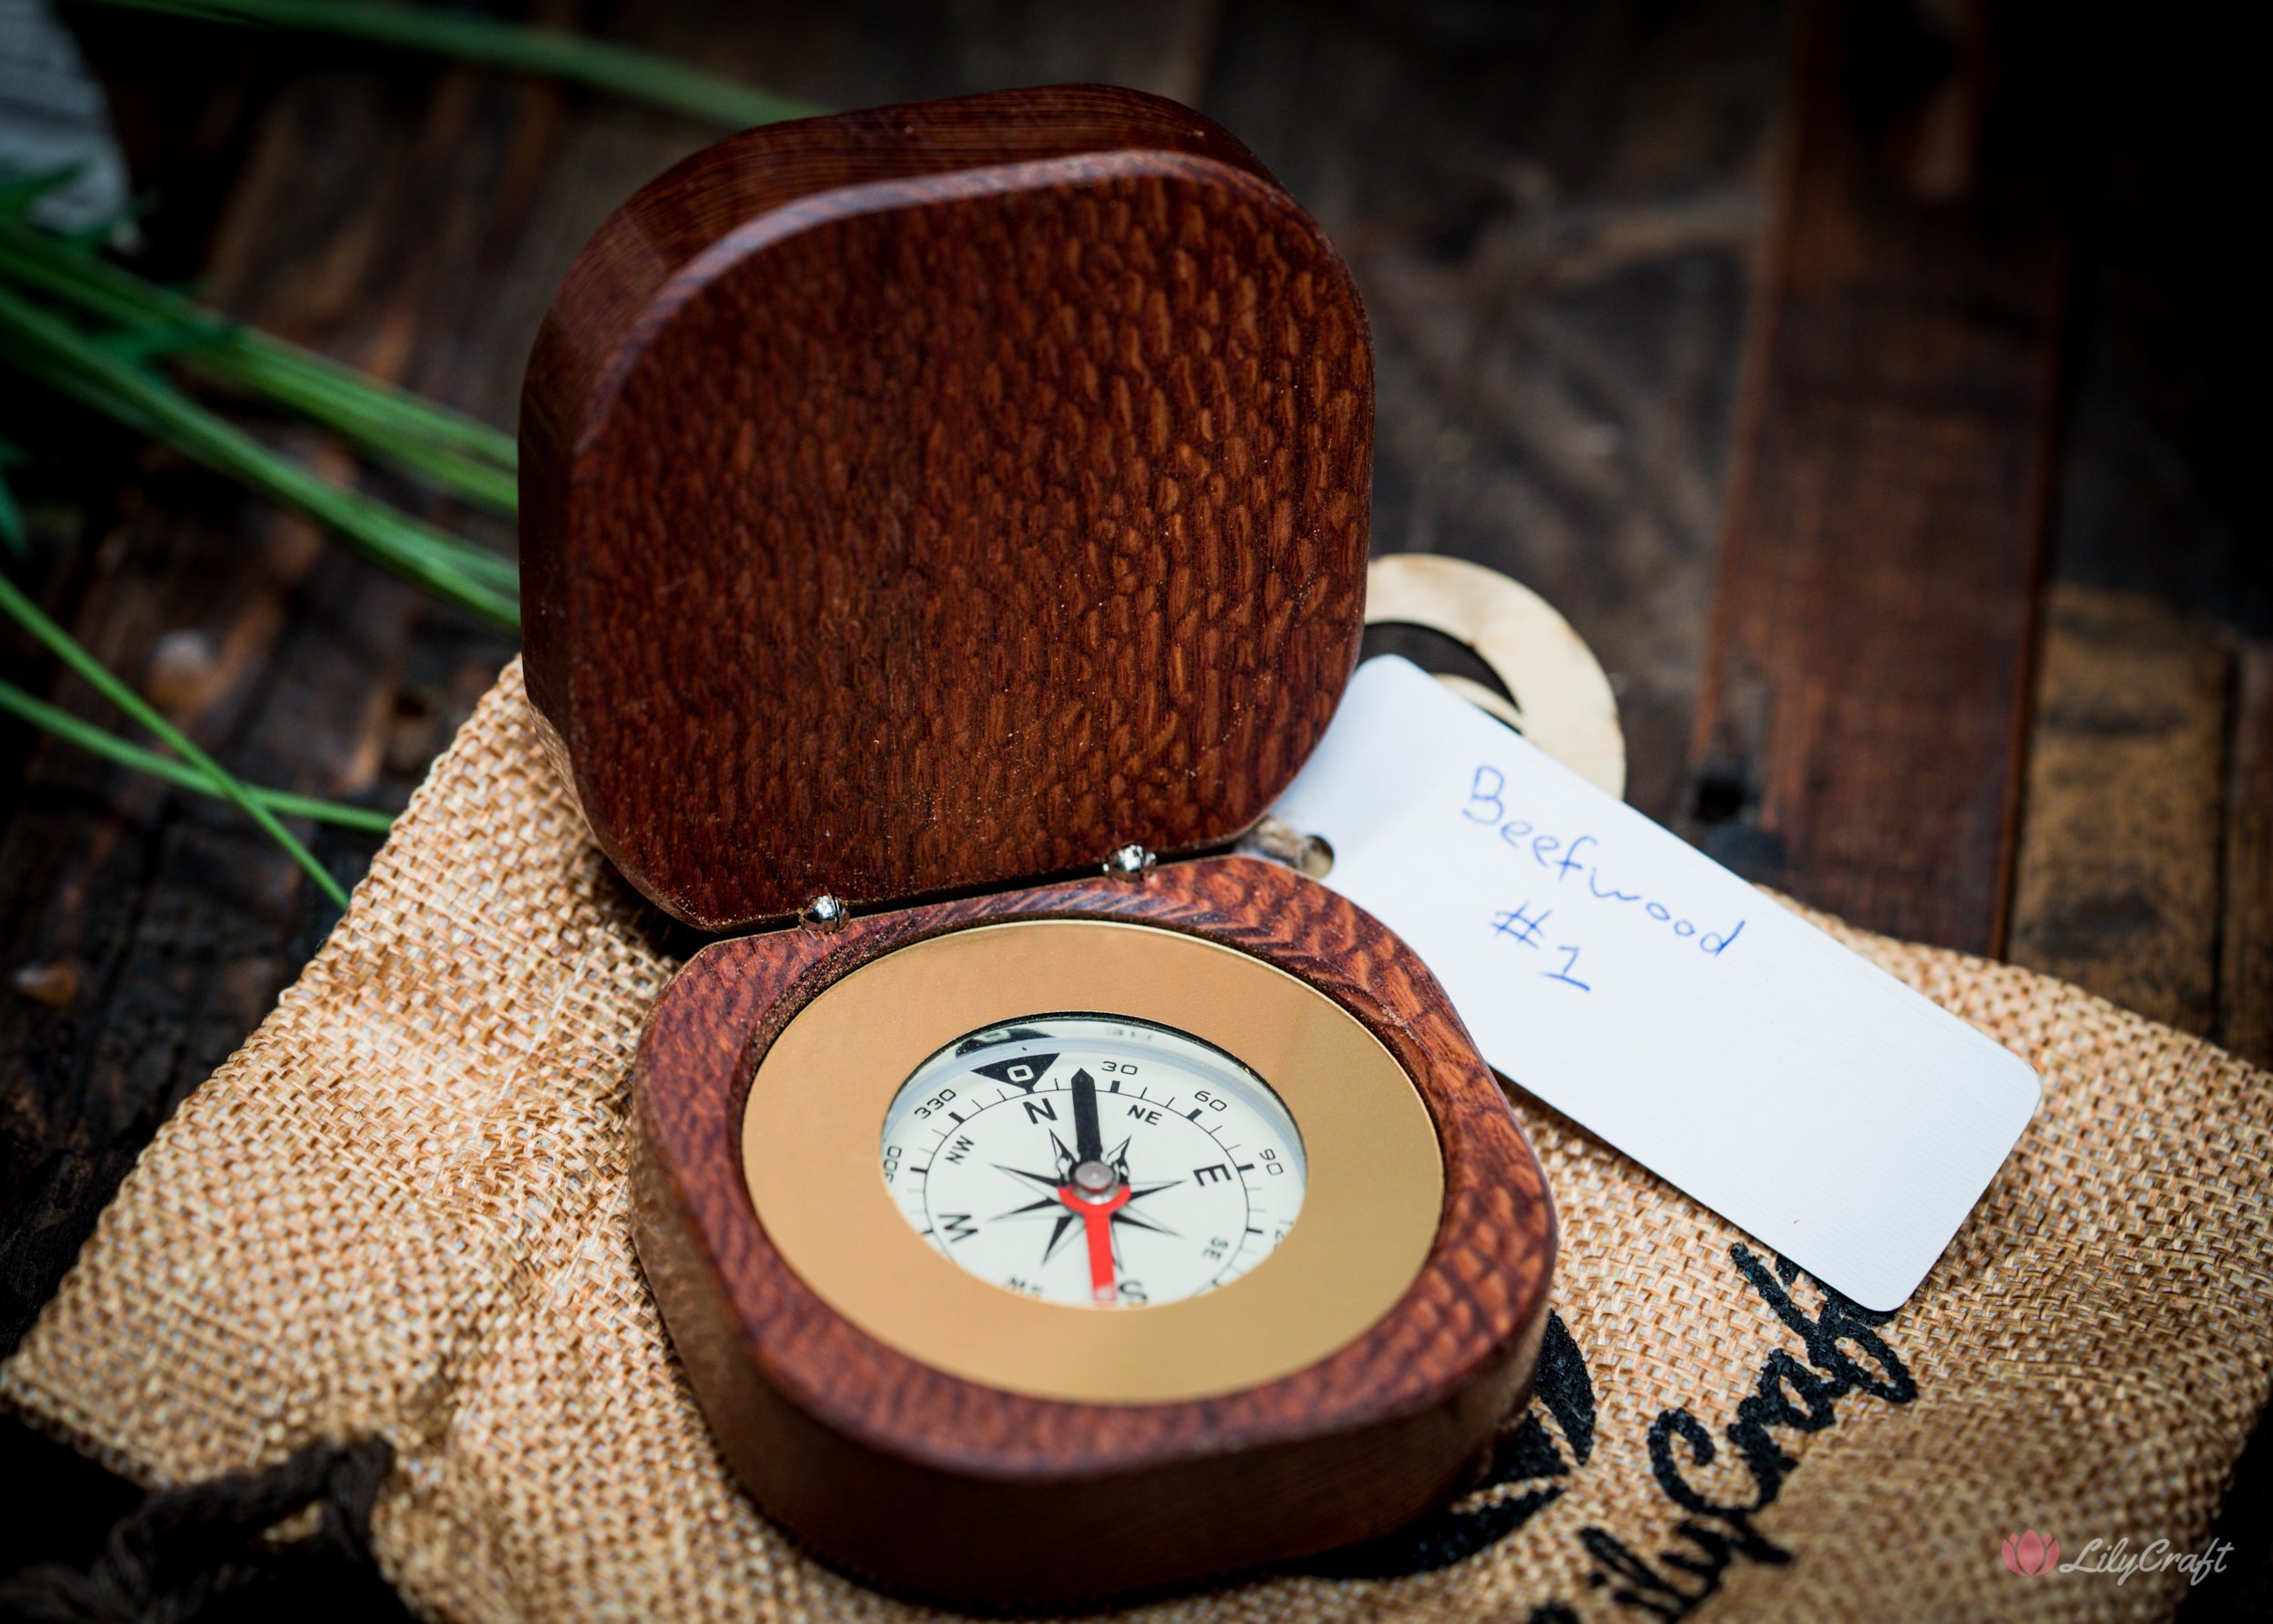 Rare wooden compass crafted with precision and care.